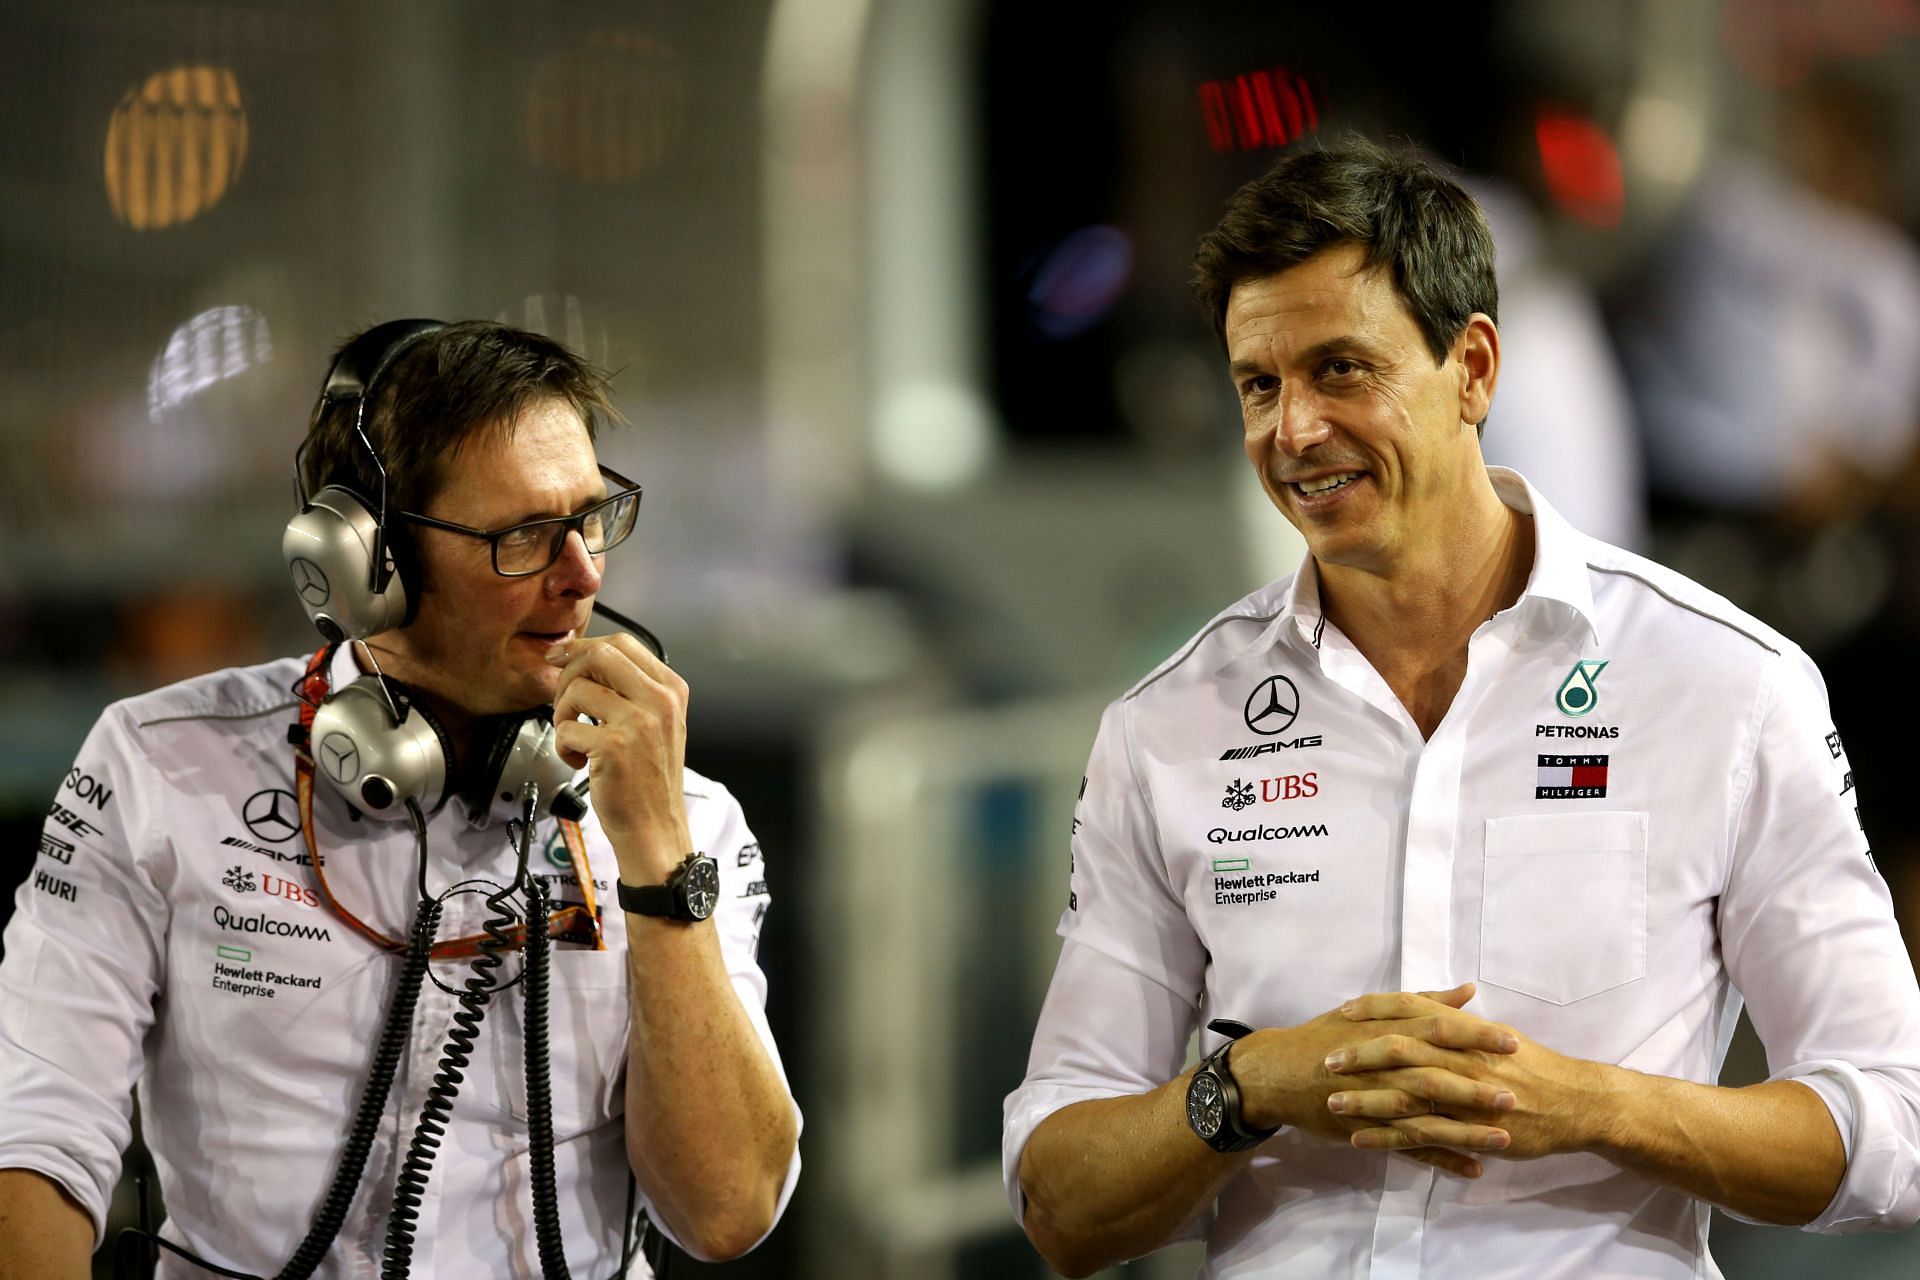 Mercedes GP Executive Director Toto Wolff and engineer Andrew Shovlin talk in the Pitlane in Singapore. (Photo by Charles Coates/Getty Images)